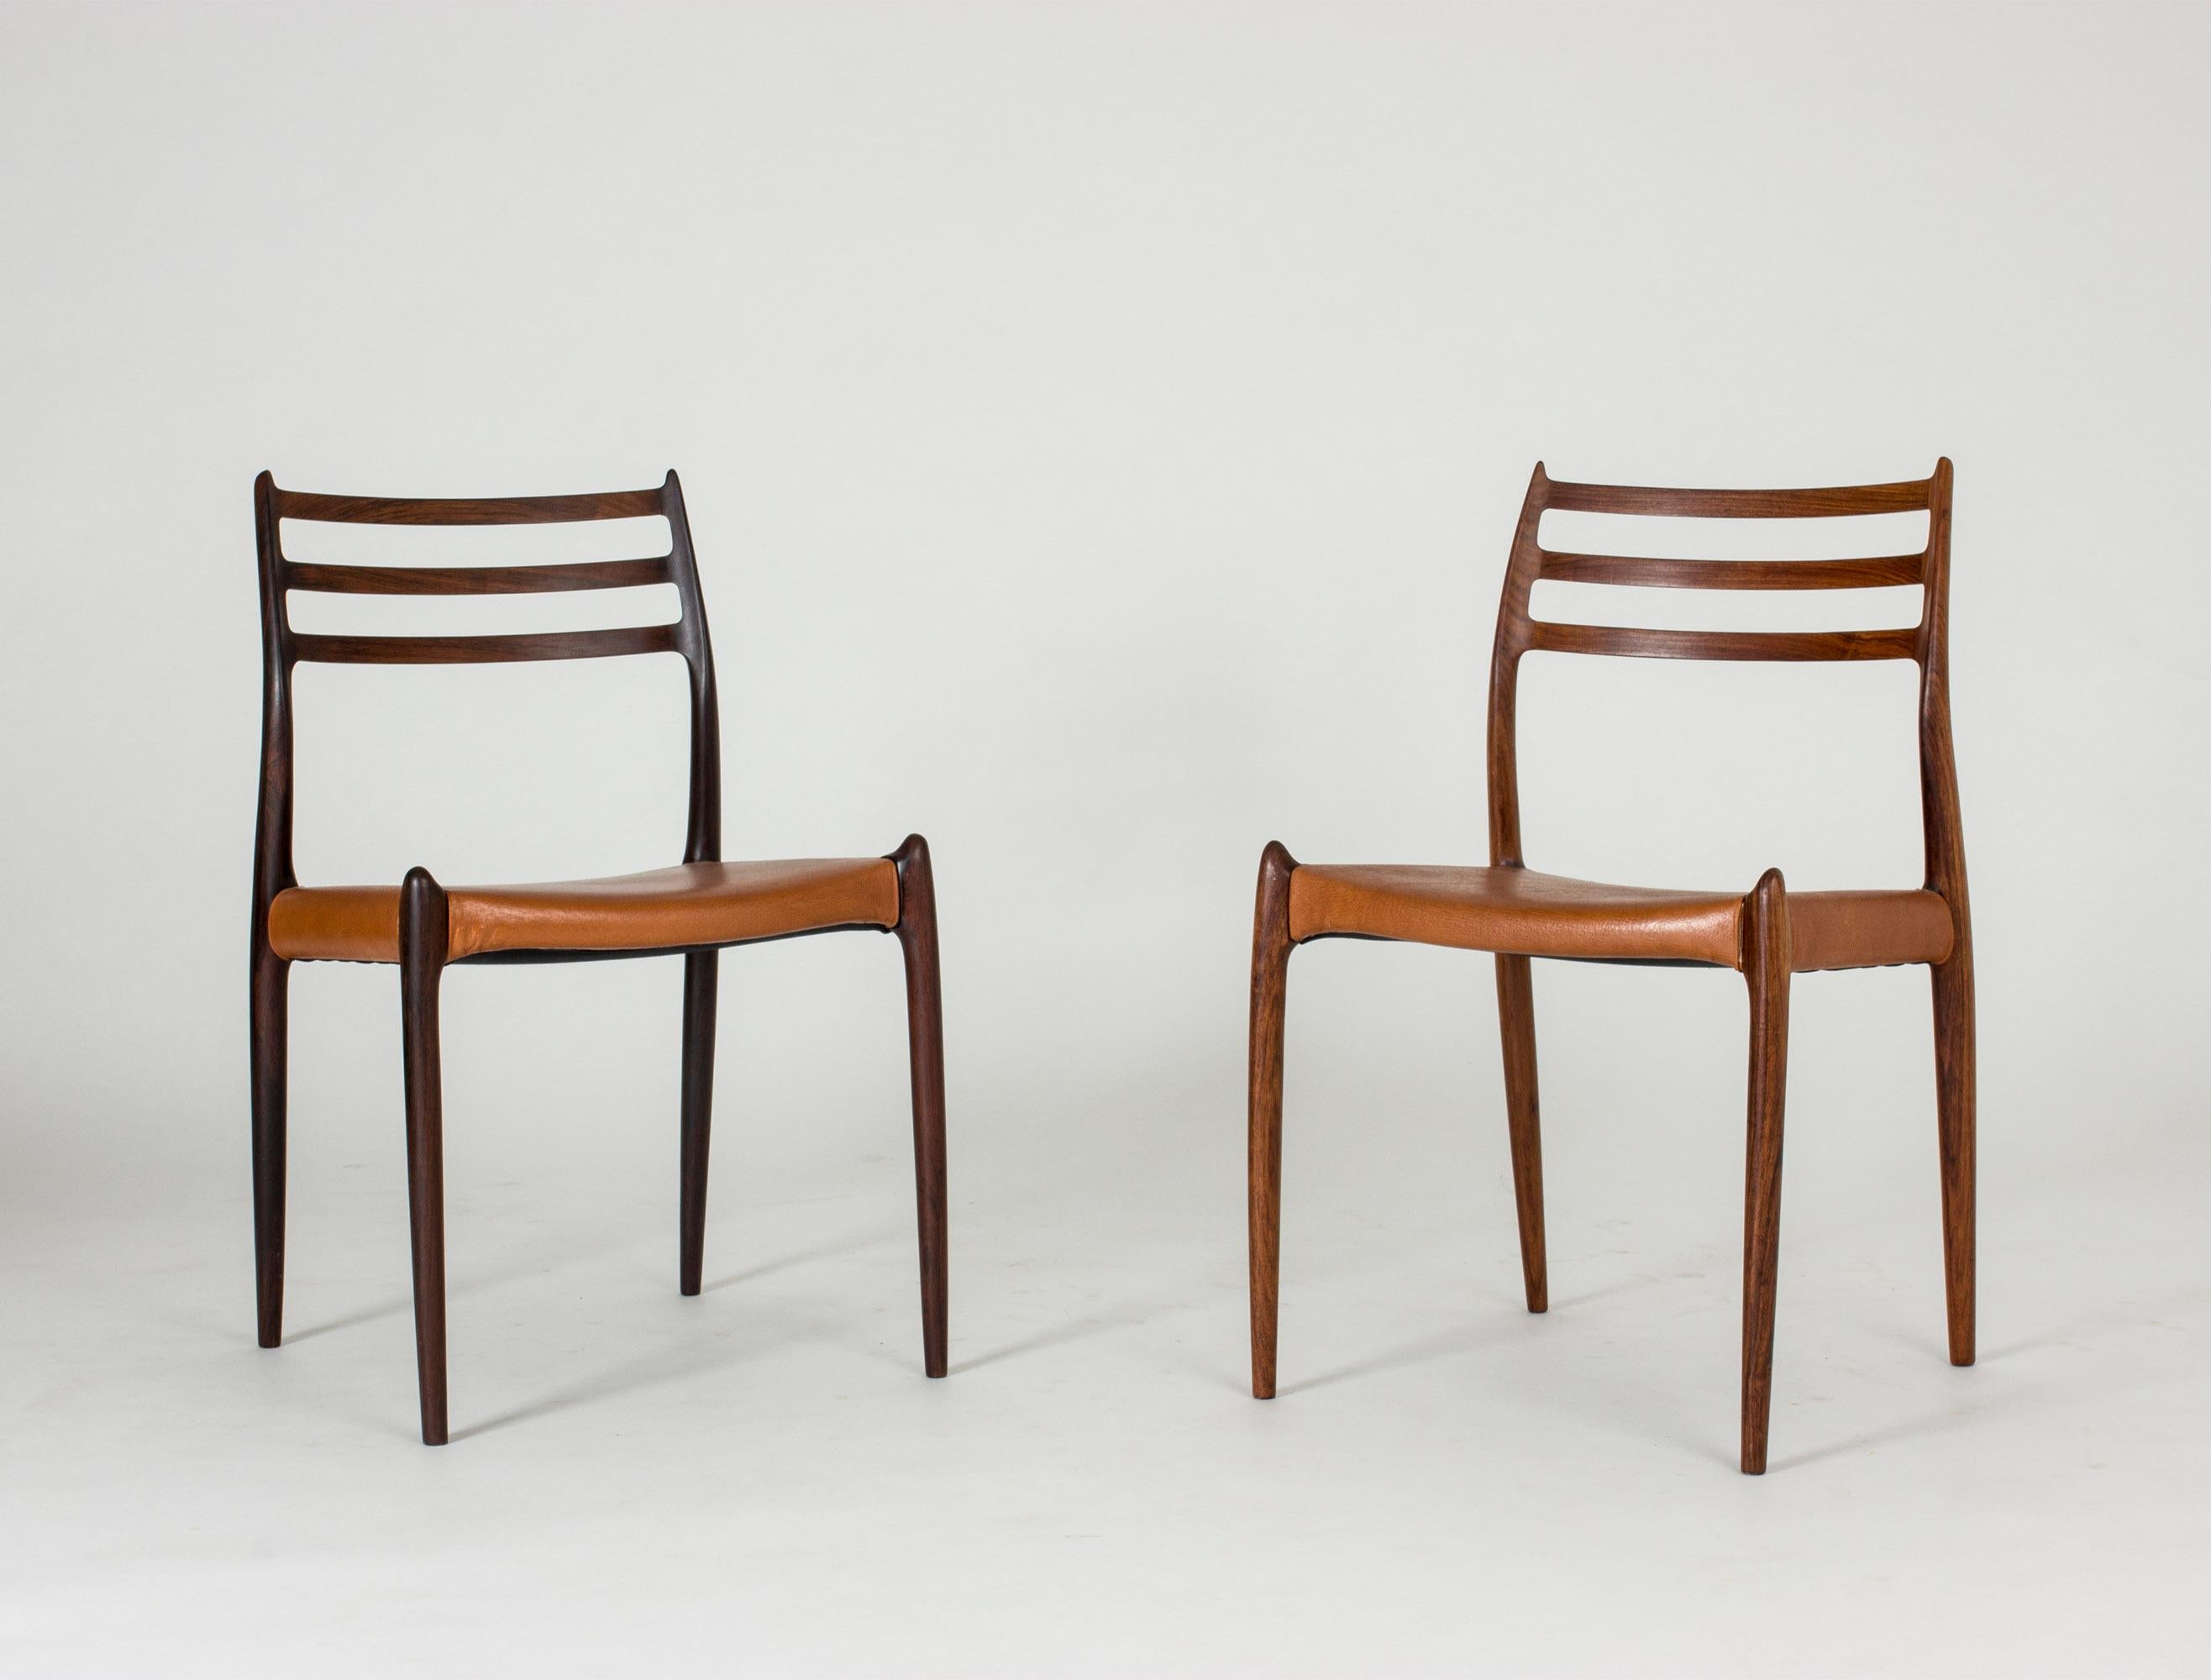 Set of eight gorgeous rosewood dining chairs by Niels O. Møller. Vintage leather seats in a tan nuance. The fluency of the design and the hornlike details at the seats and on the backrests give these chairs a breathtaking grace with daring